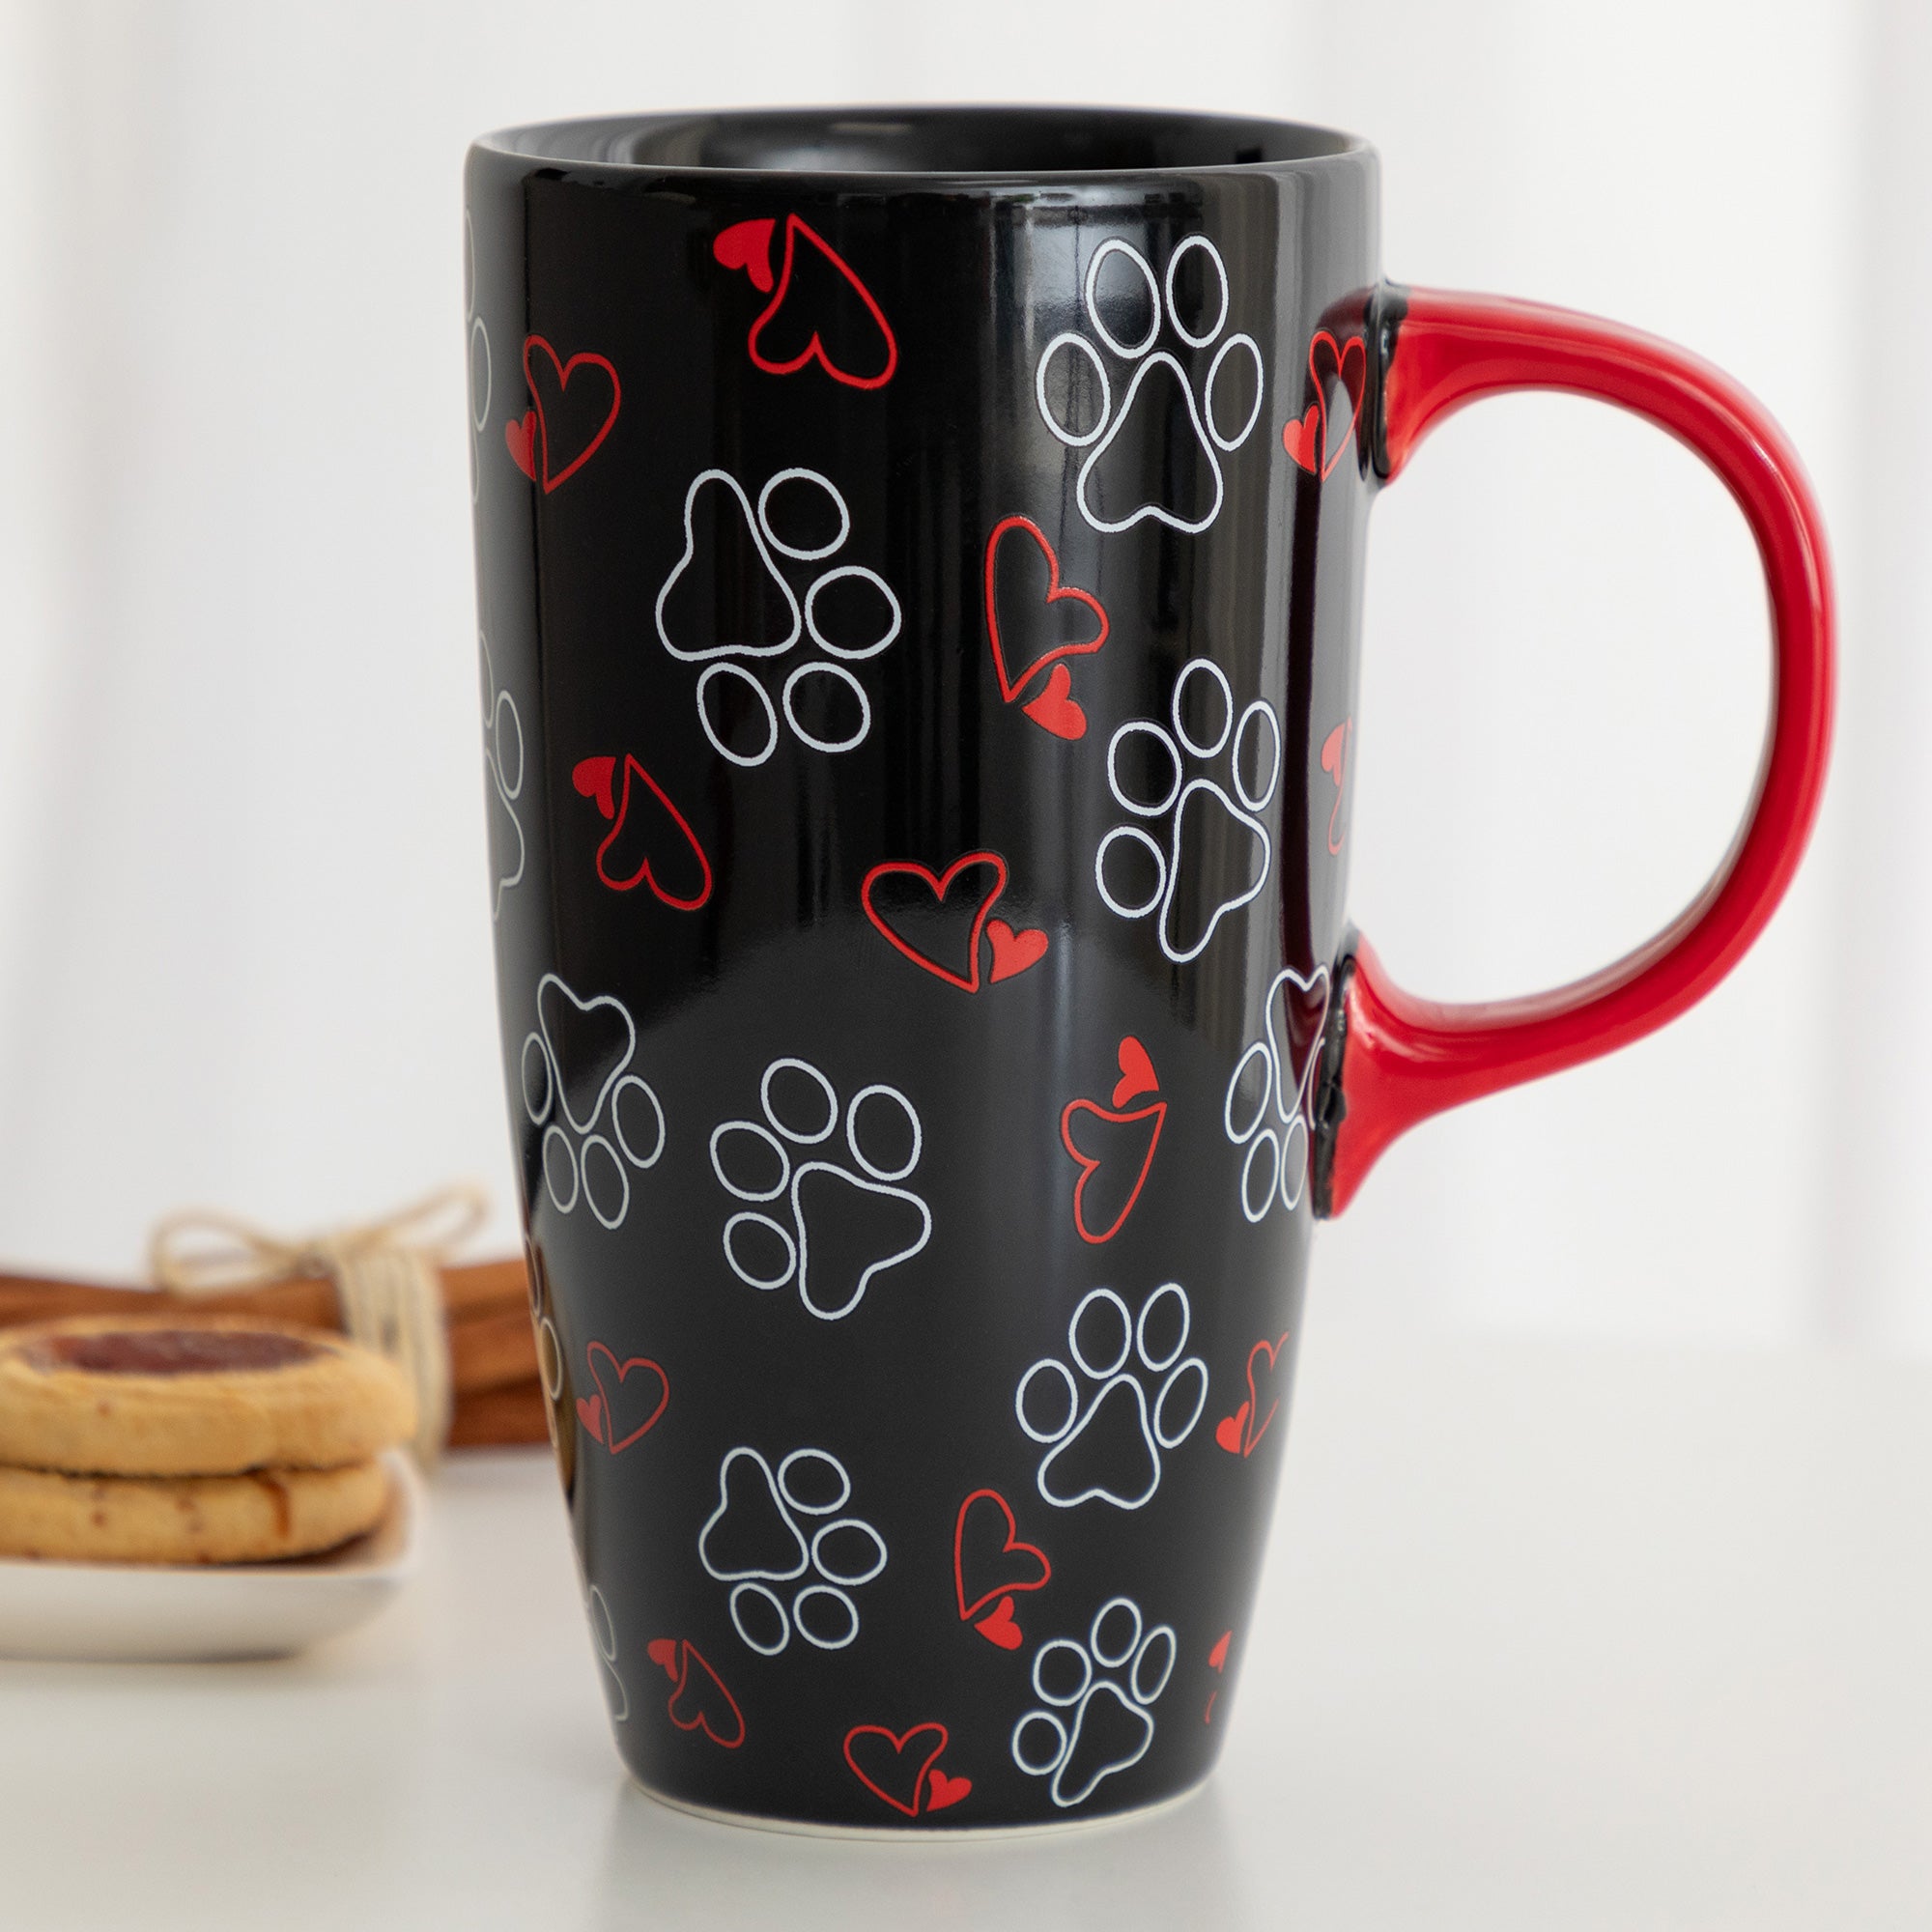 Paws & Prints Tall Ceramic Mug - Outlined Paws & Hearts